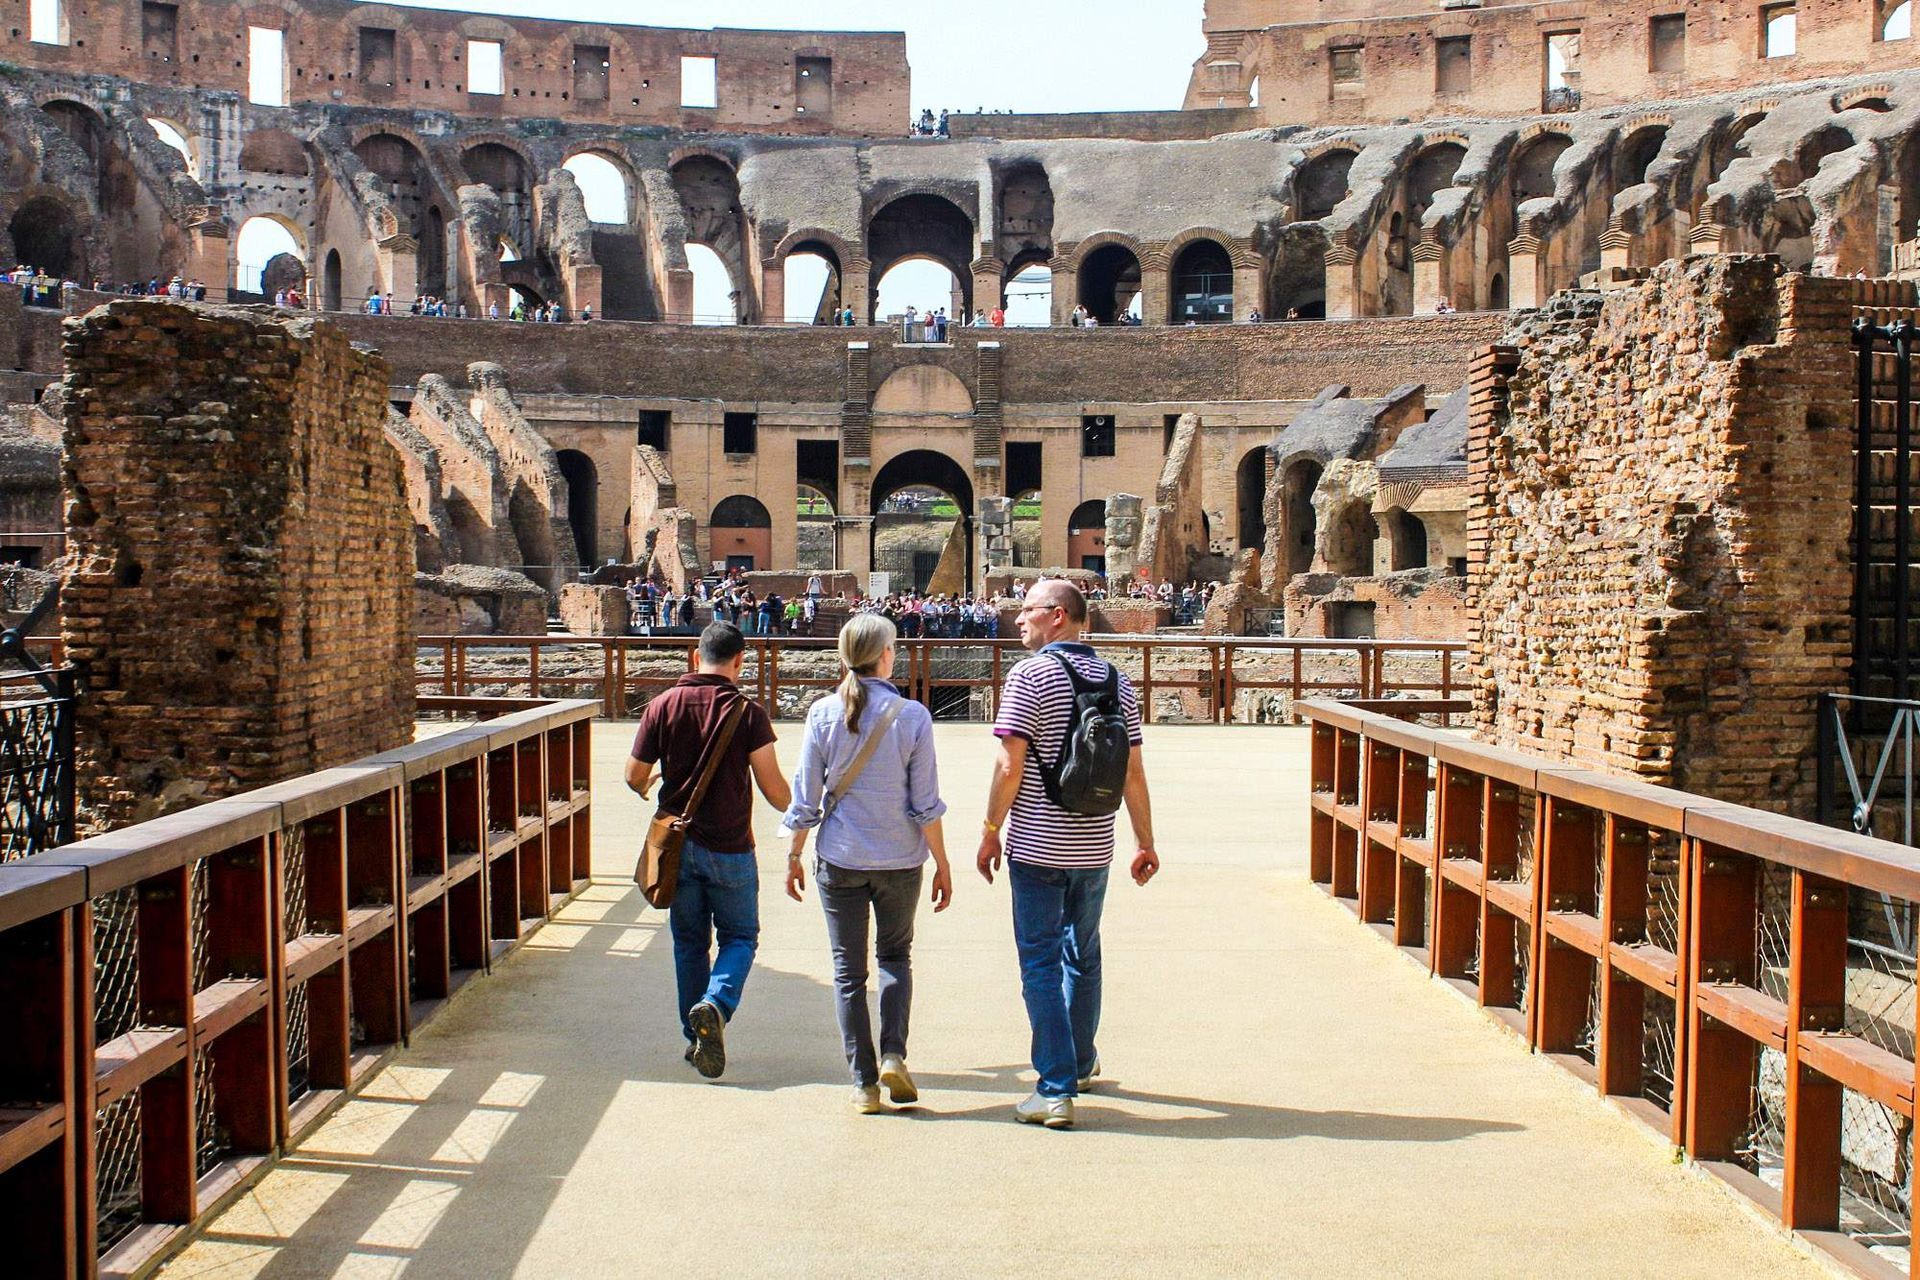 Colosseum Private Tour and Tickets including Roman Forum and Palatine Hill.